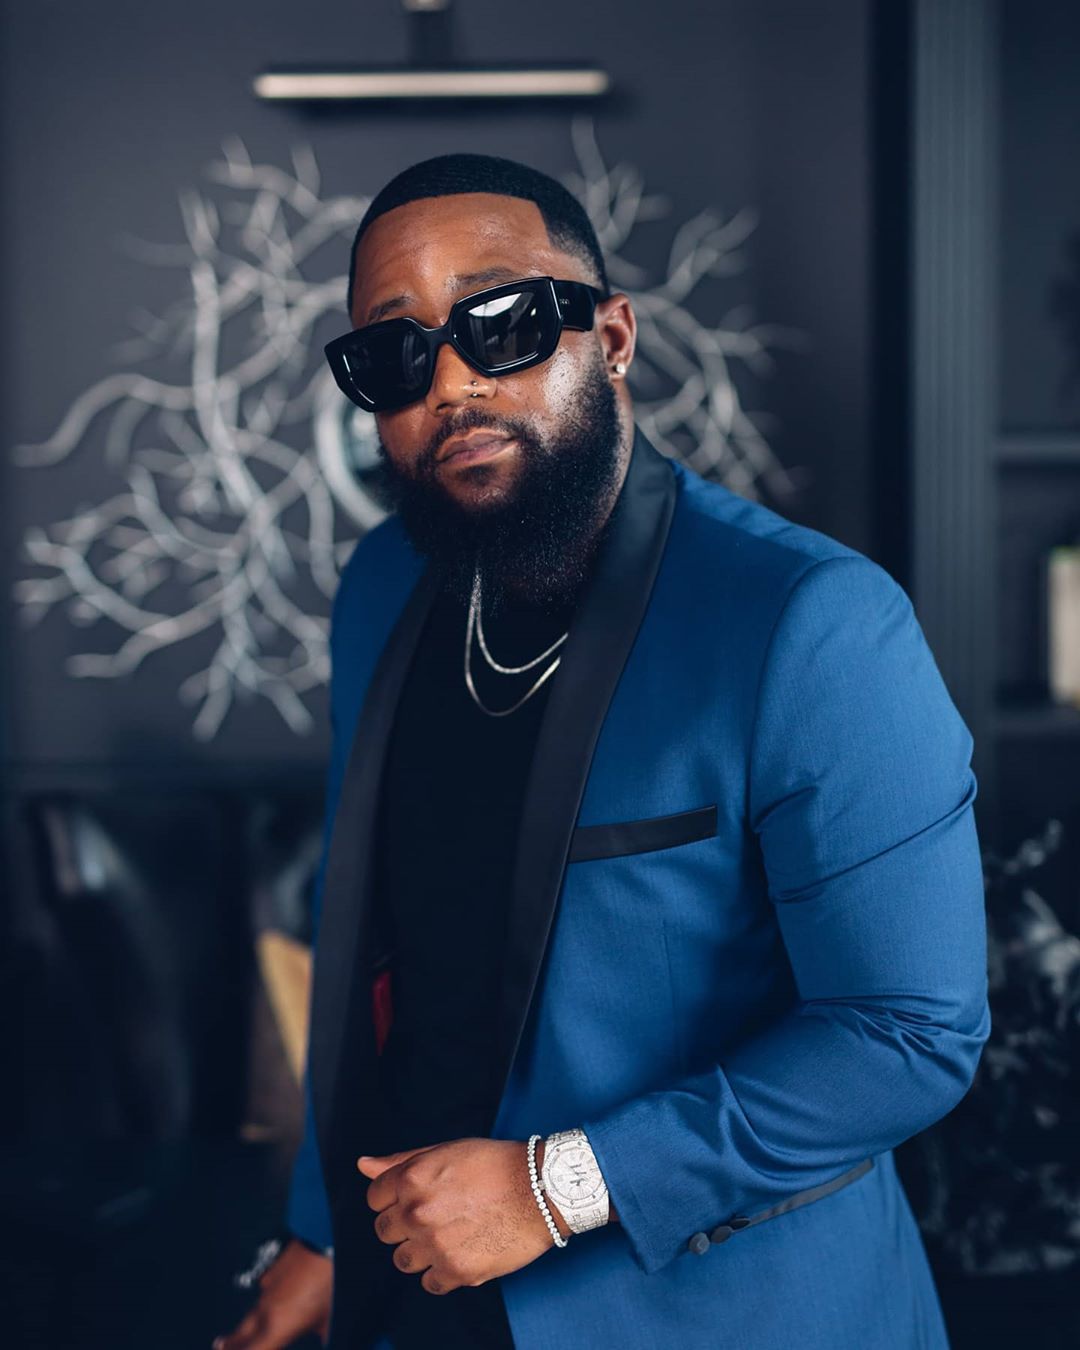 Cassper Nyovest Confirm He Tested Positive For COVID-19